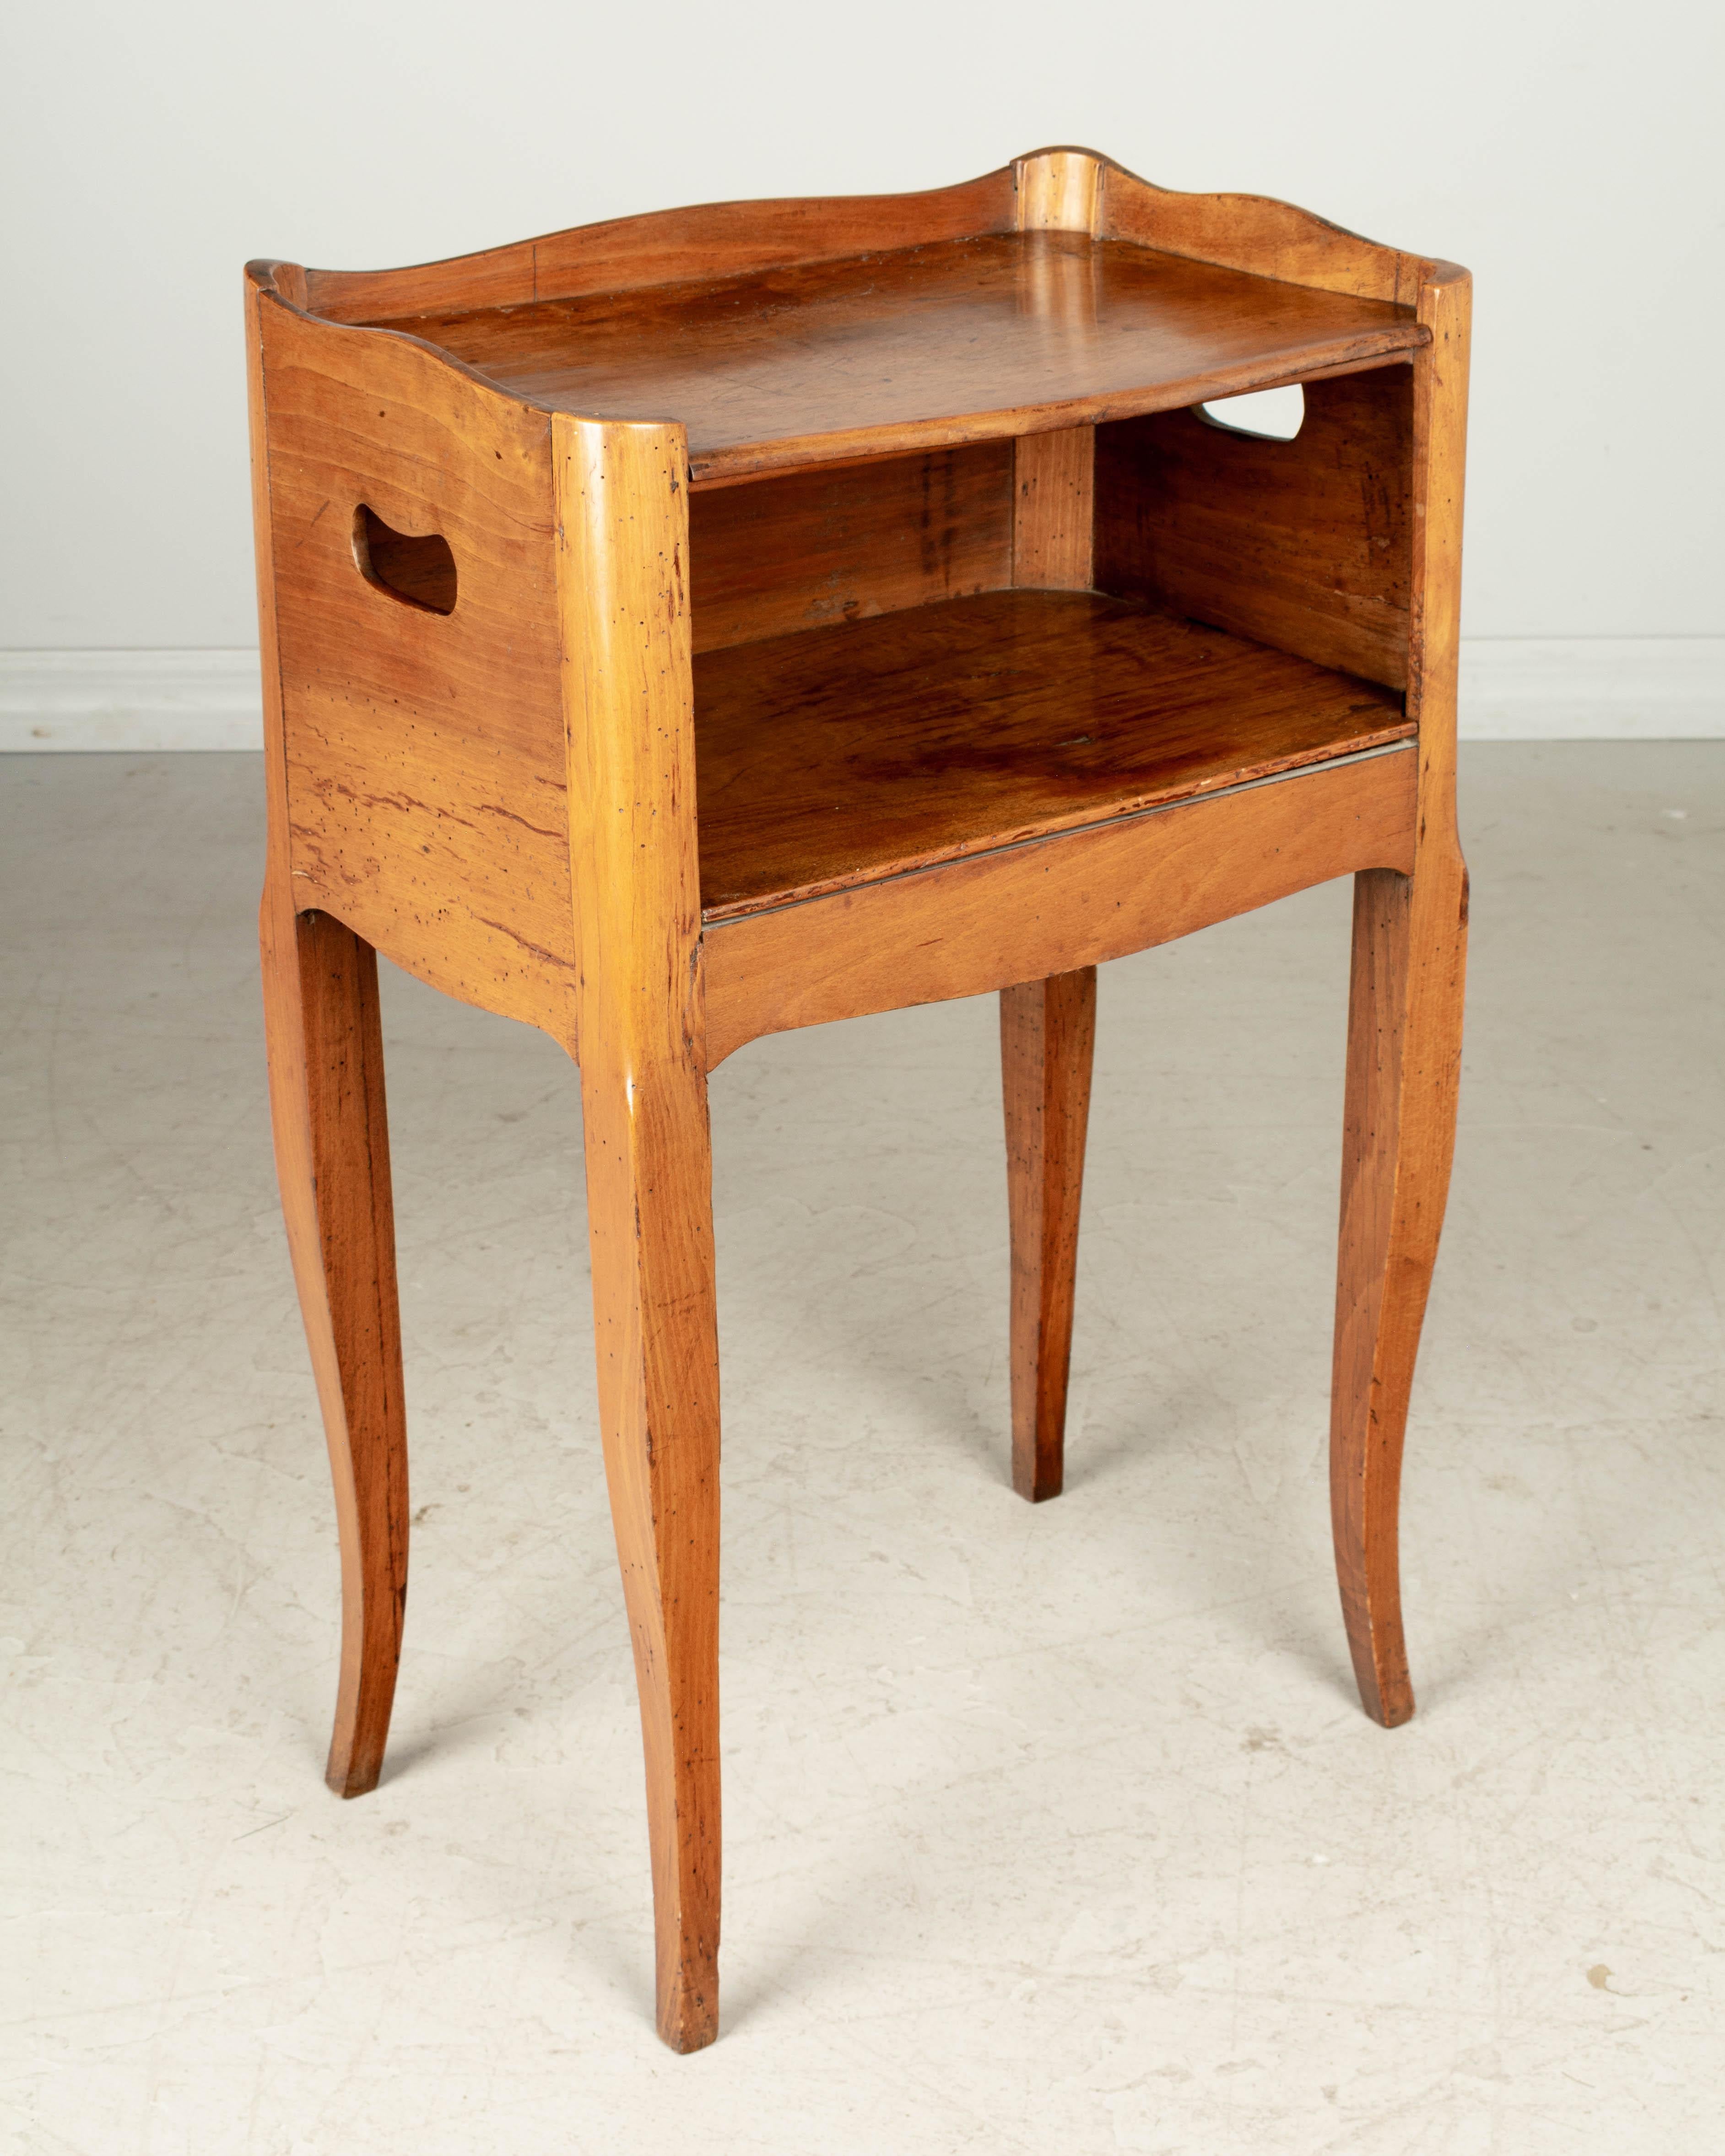 A Louis XV style Country French side table or nightstand made of solid walnut, with open niche and pierced cut-out handles. Small dovetailed drawer on the right side. Curved front corners, and gallery surrounding the top. Waxed finish. All original.